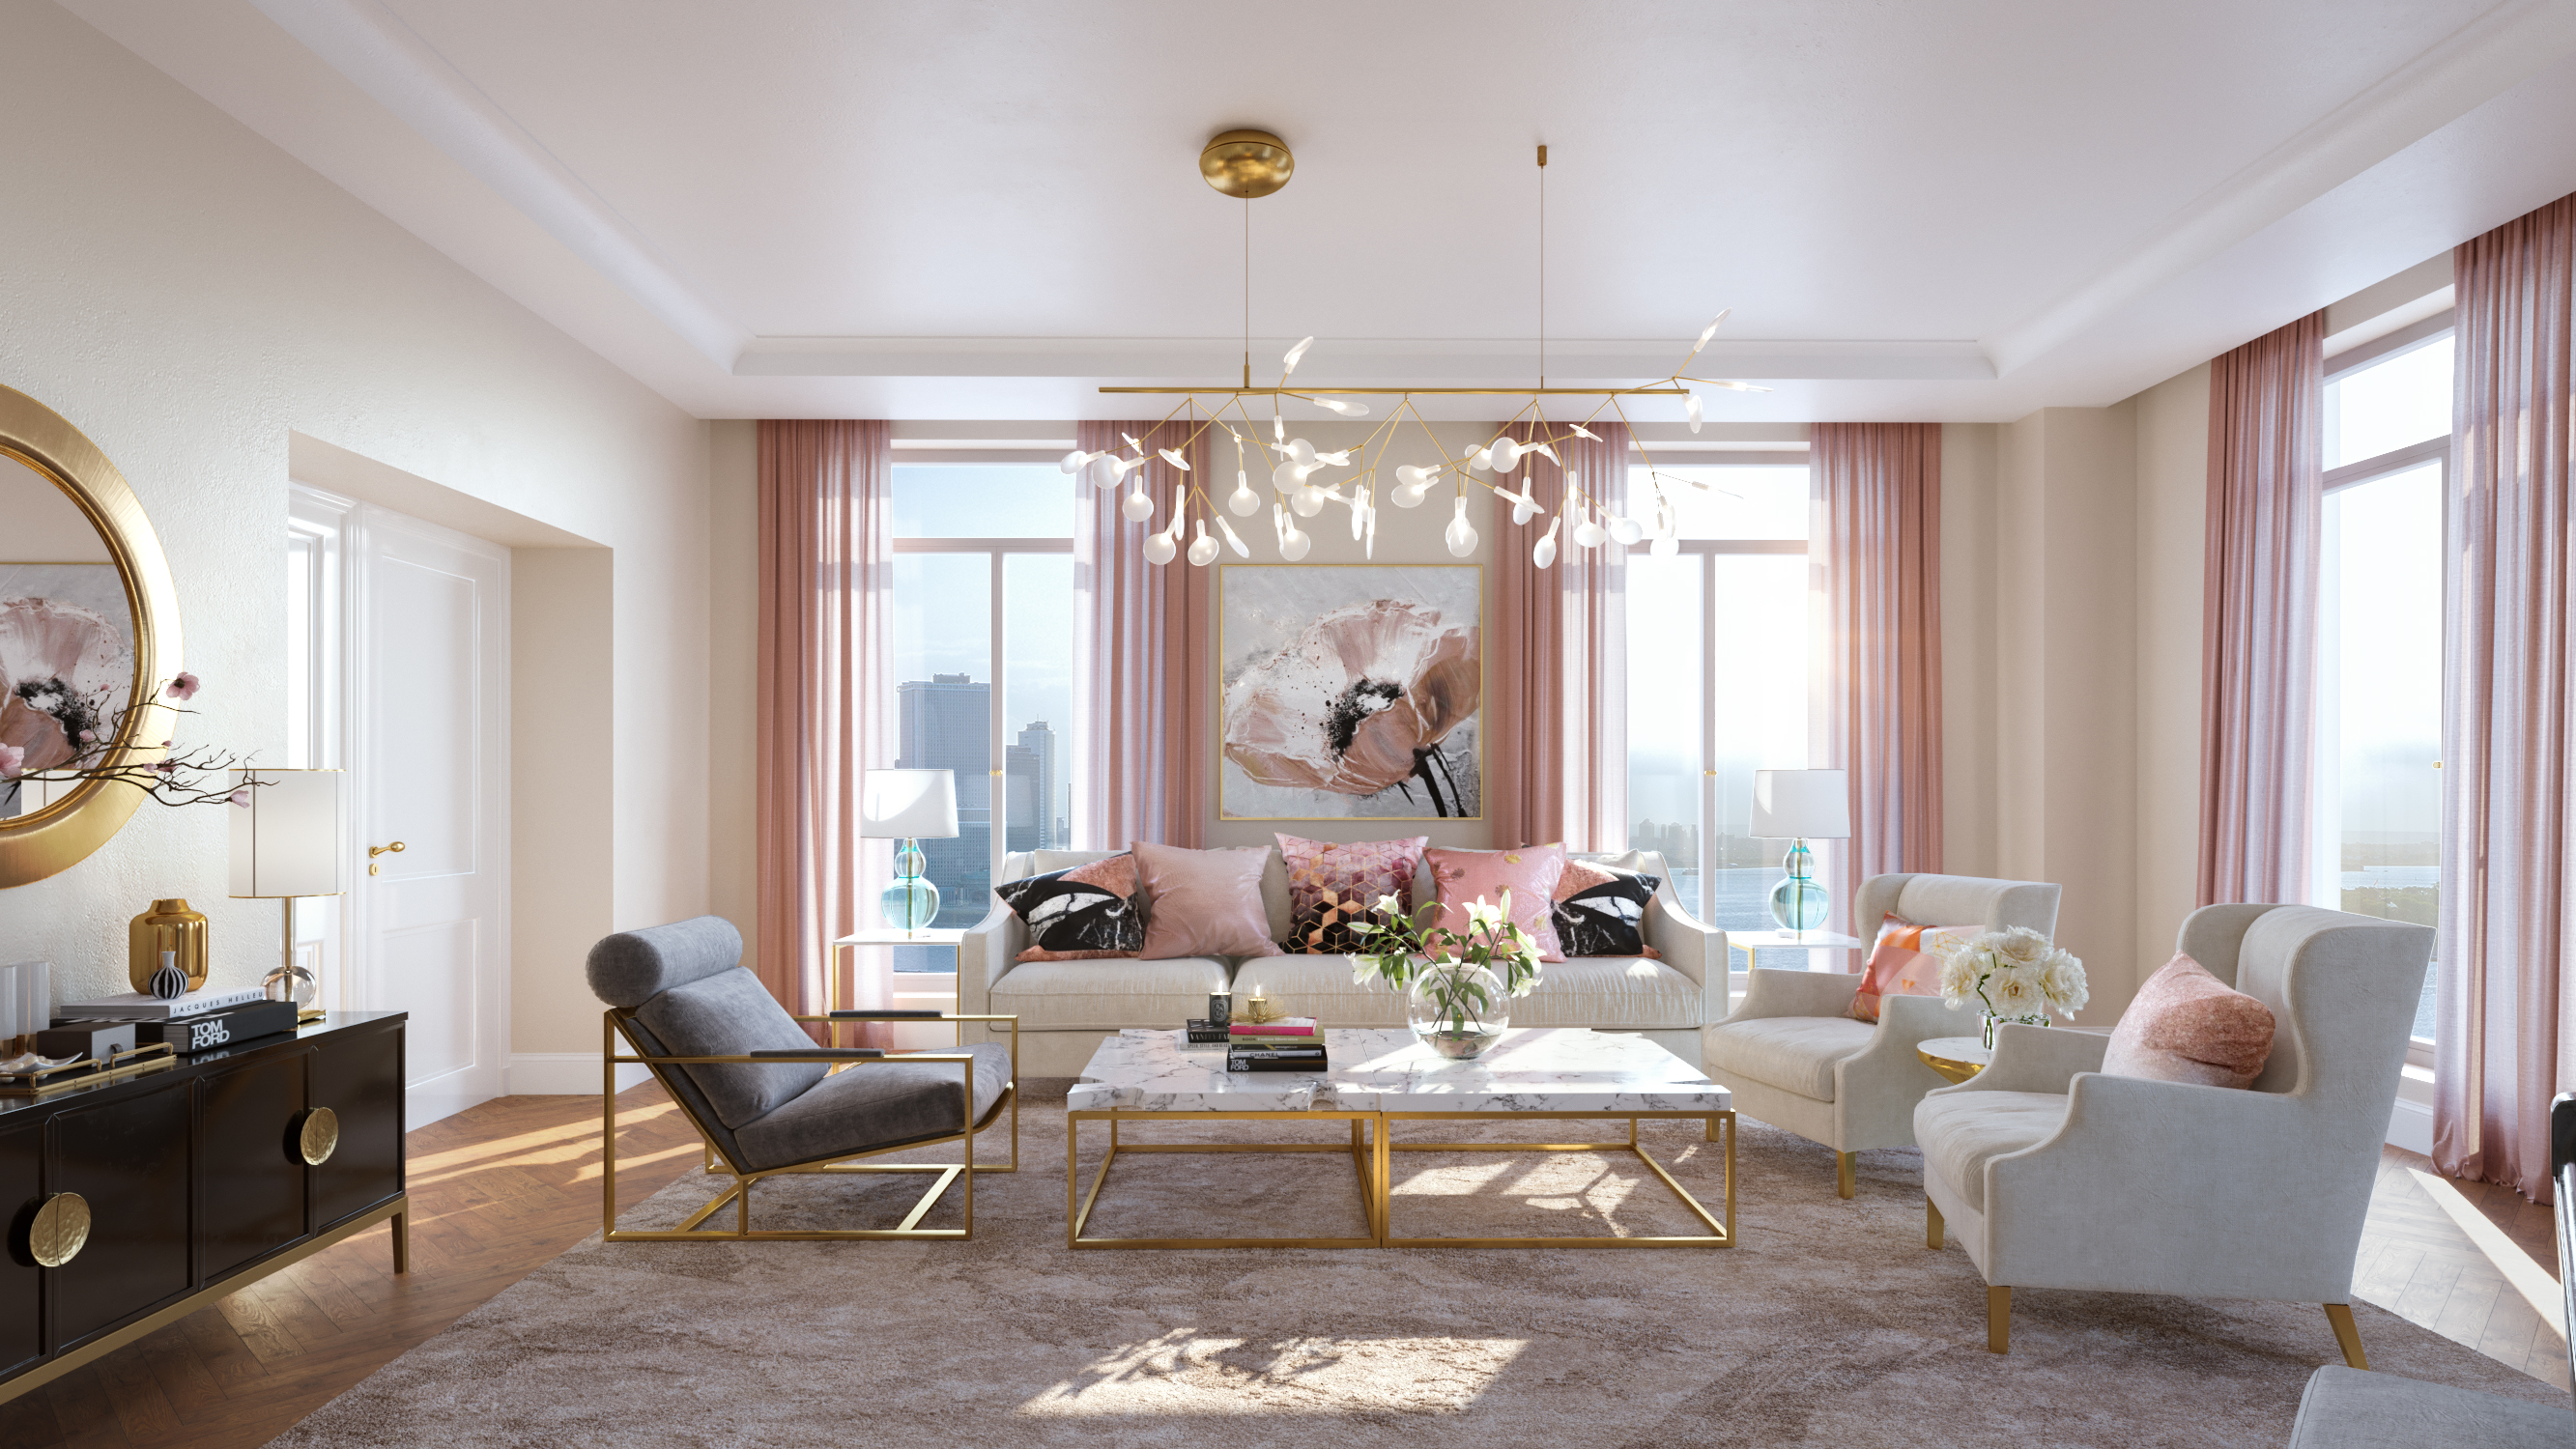 Living Room With Rose Gold Accents